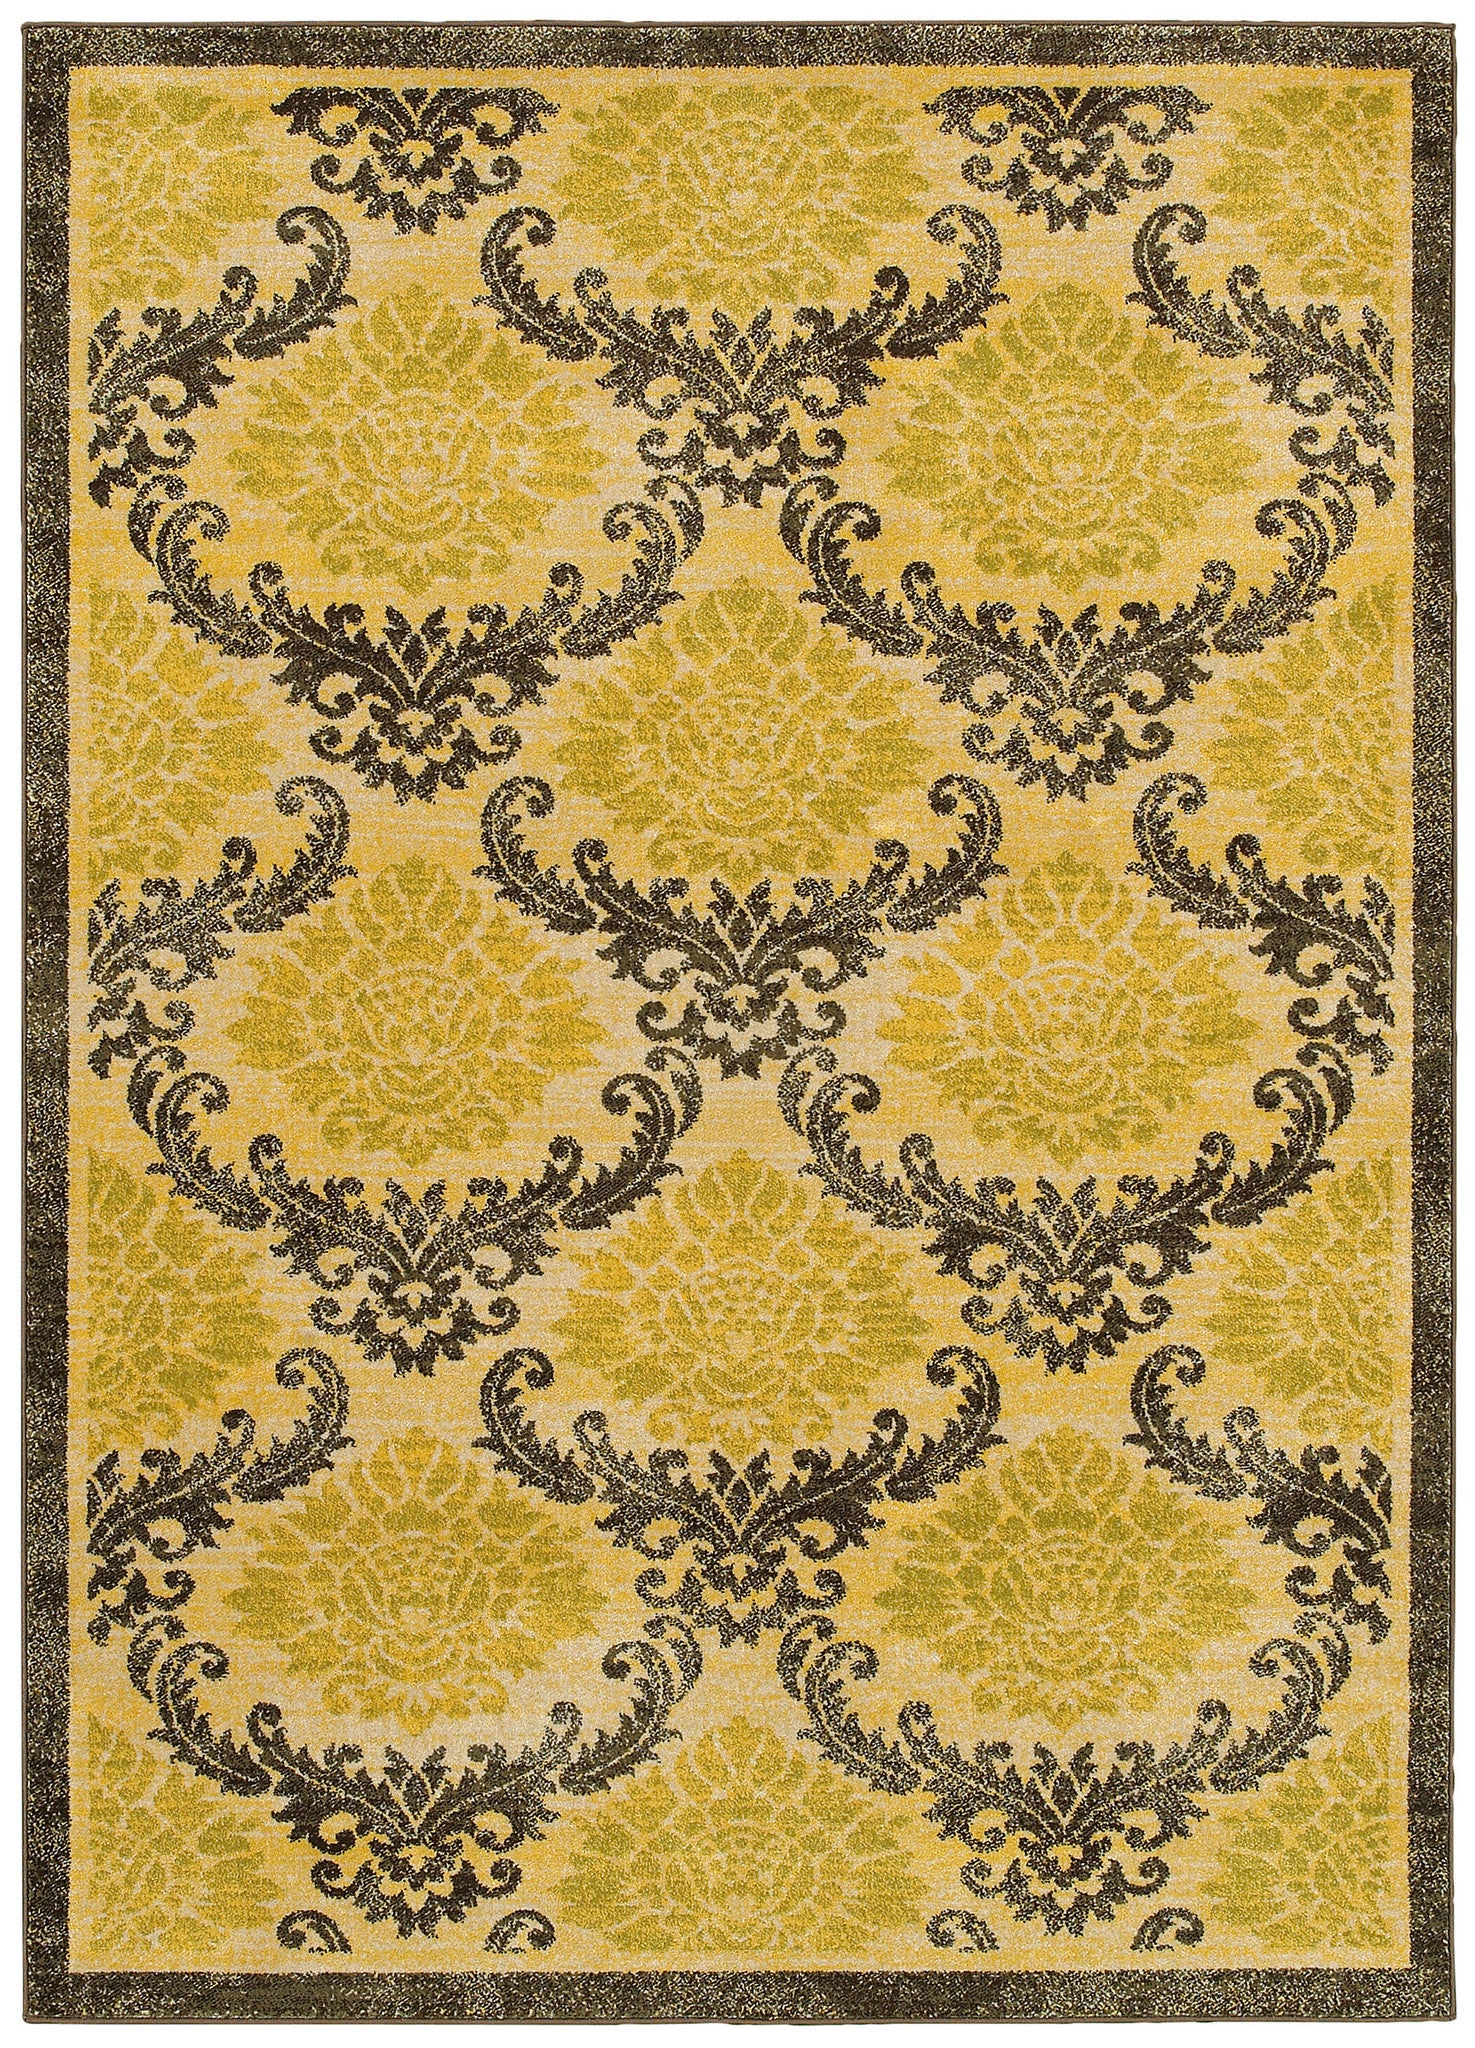 LR Resources Antigua 80995 Gold/Brown Area Rug